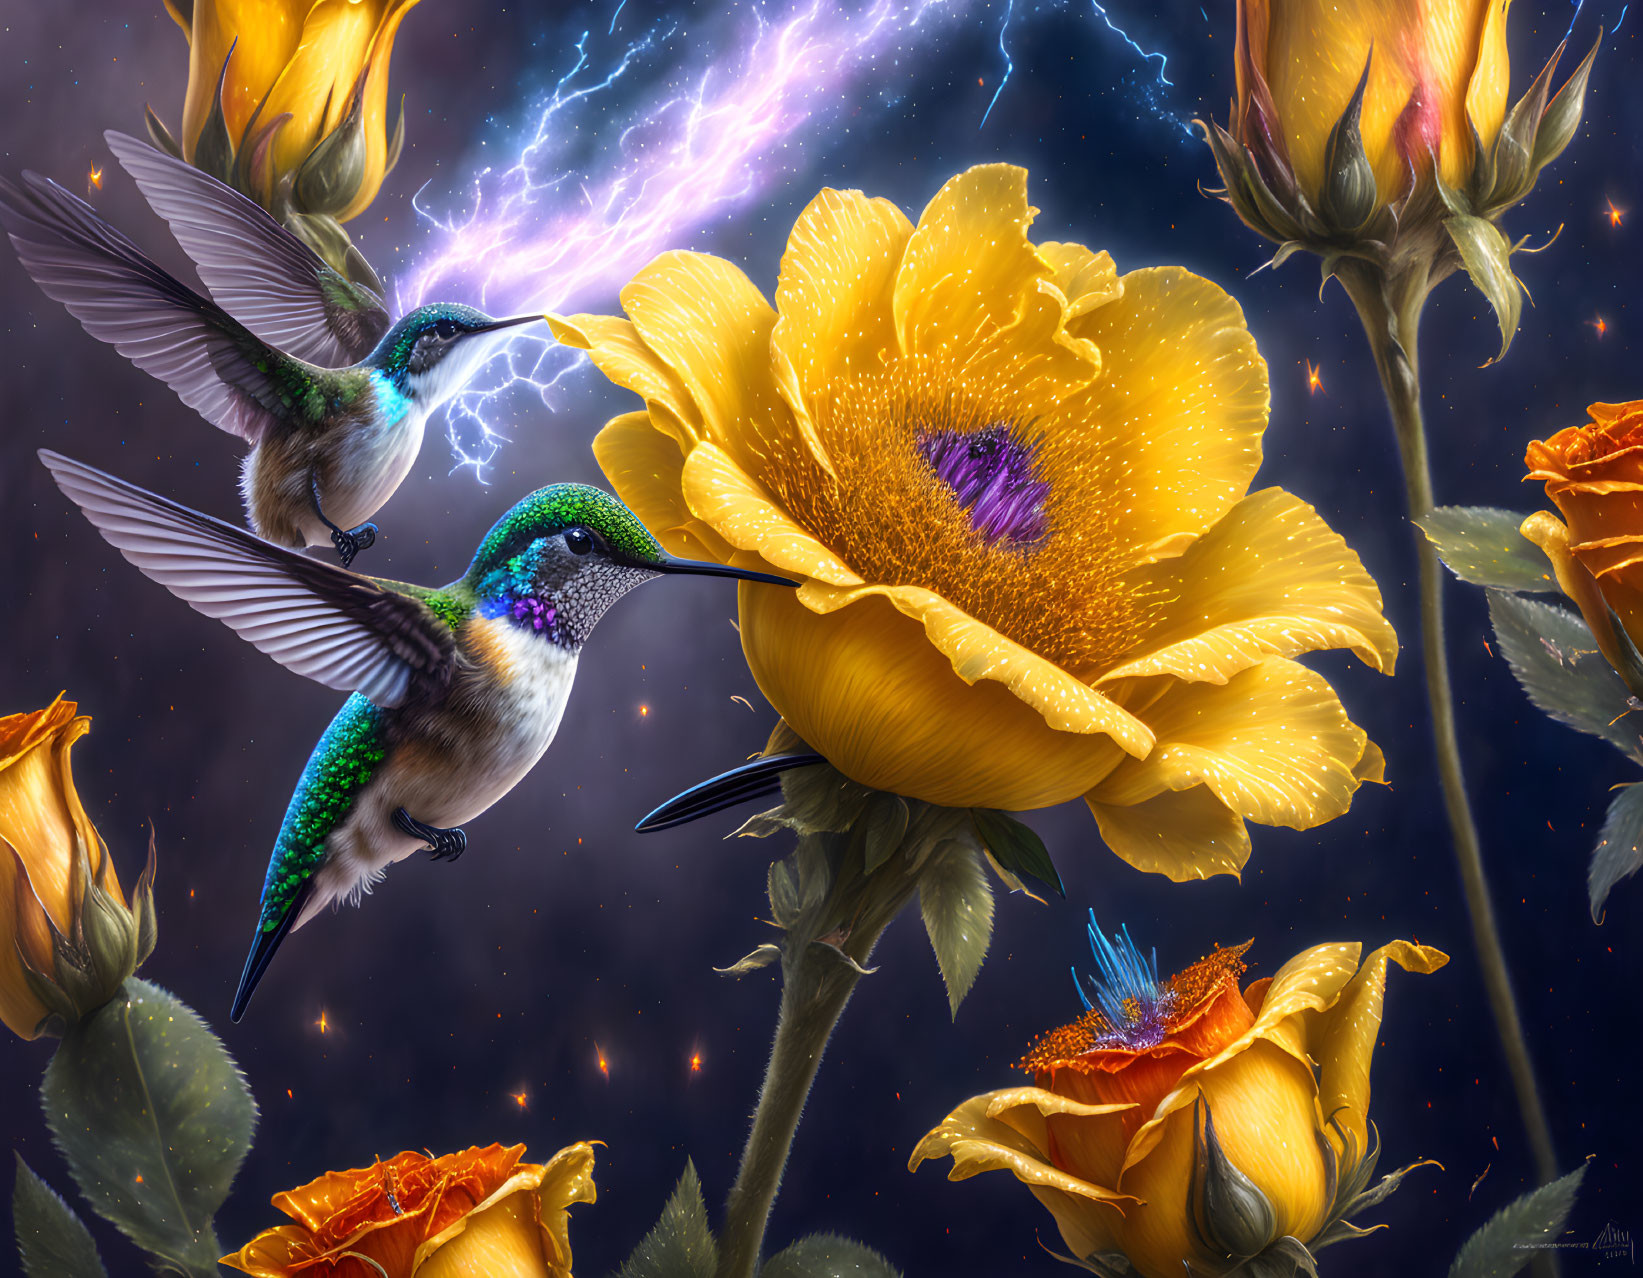 Two hummingbirds flying near yellow flowers under a starry sky with lightning.